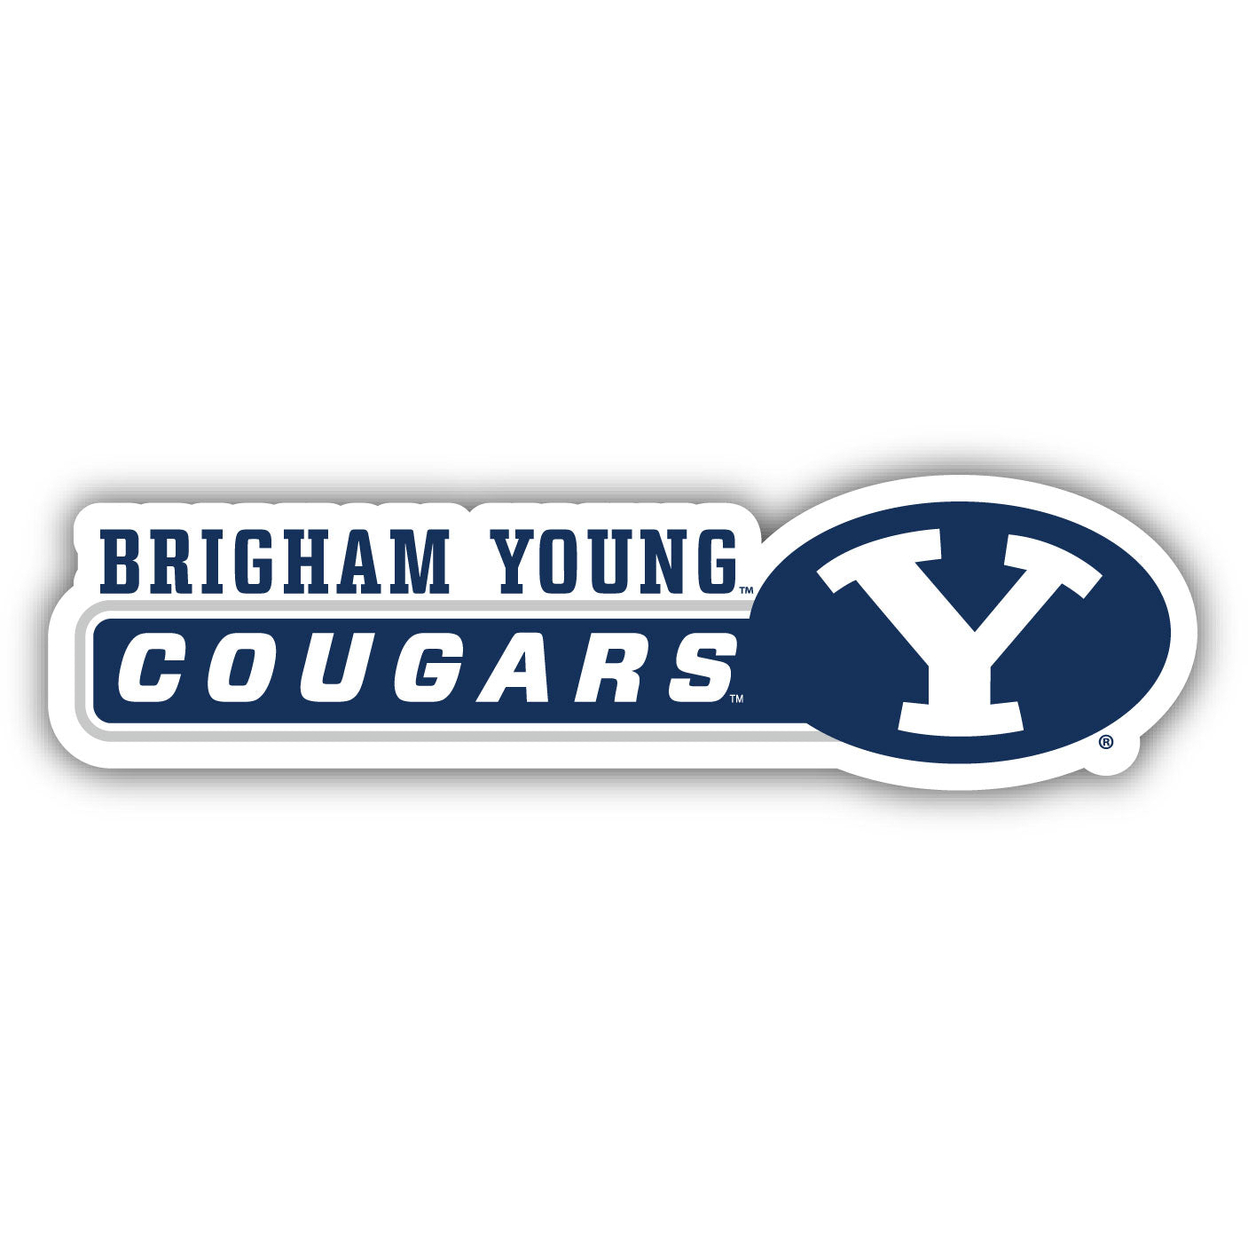 Brigham Young Cougars 4 Inch Wide Colorful Vinyl Decal Sticker